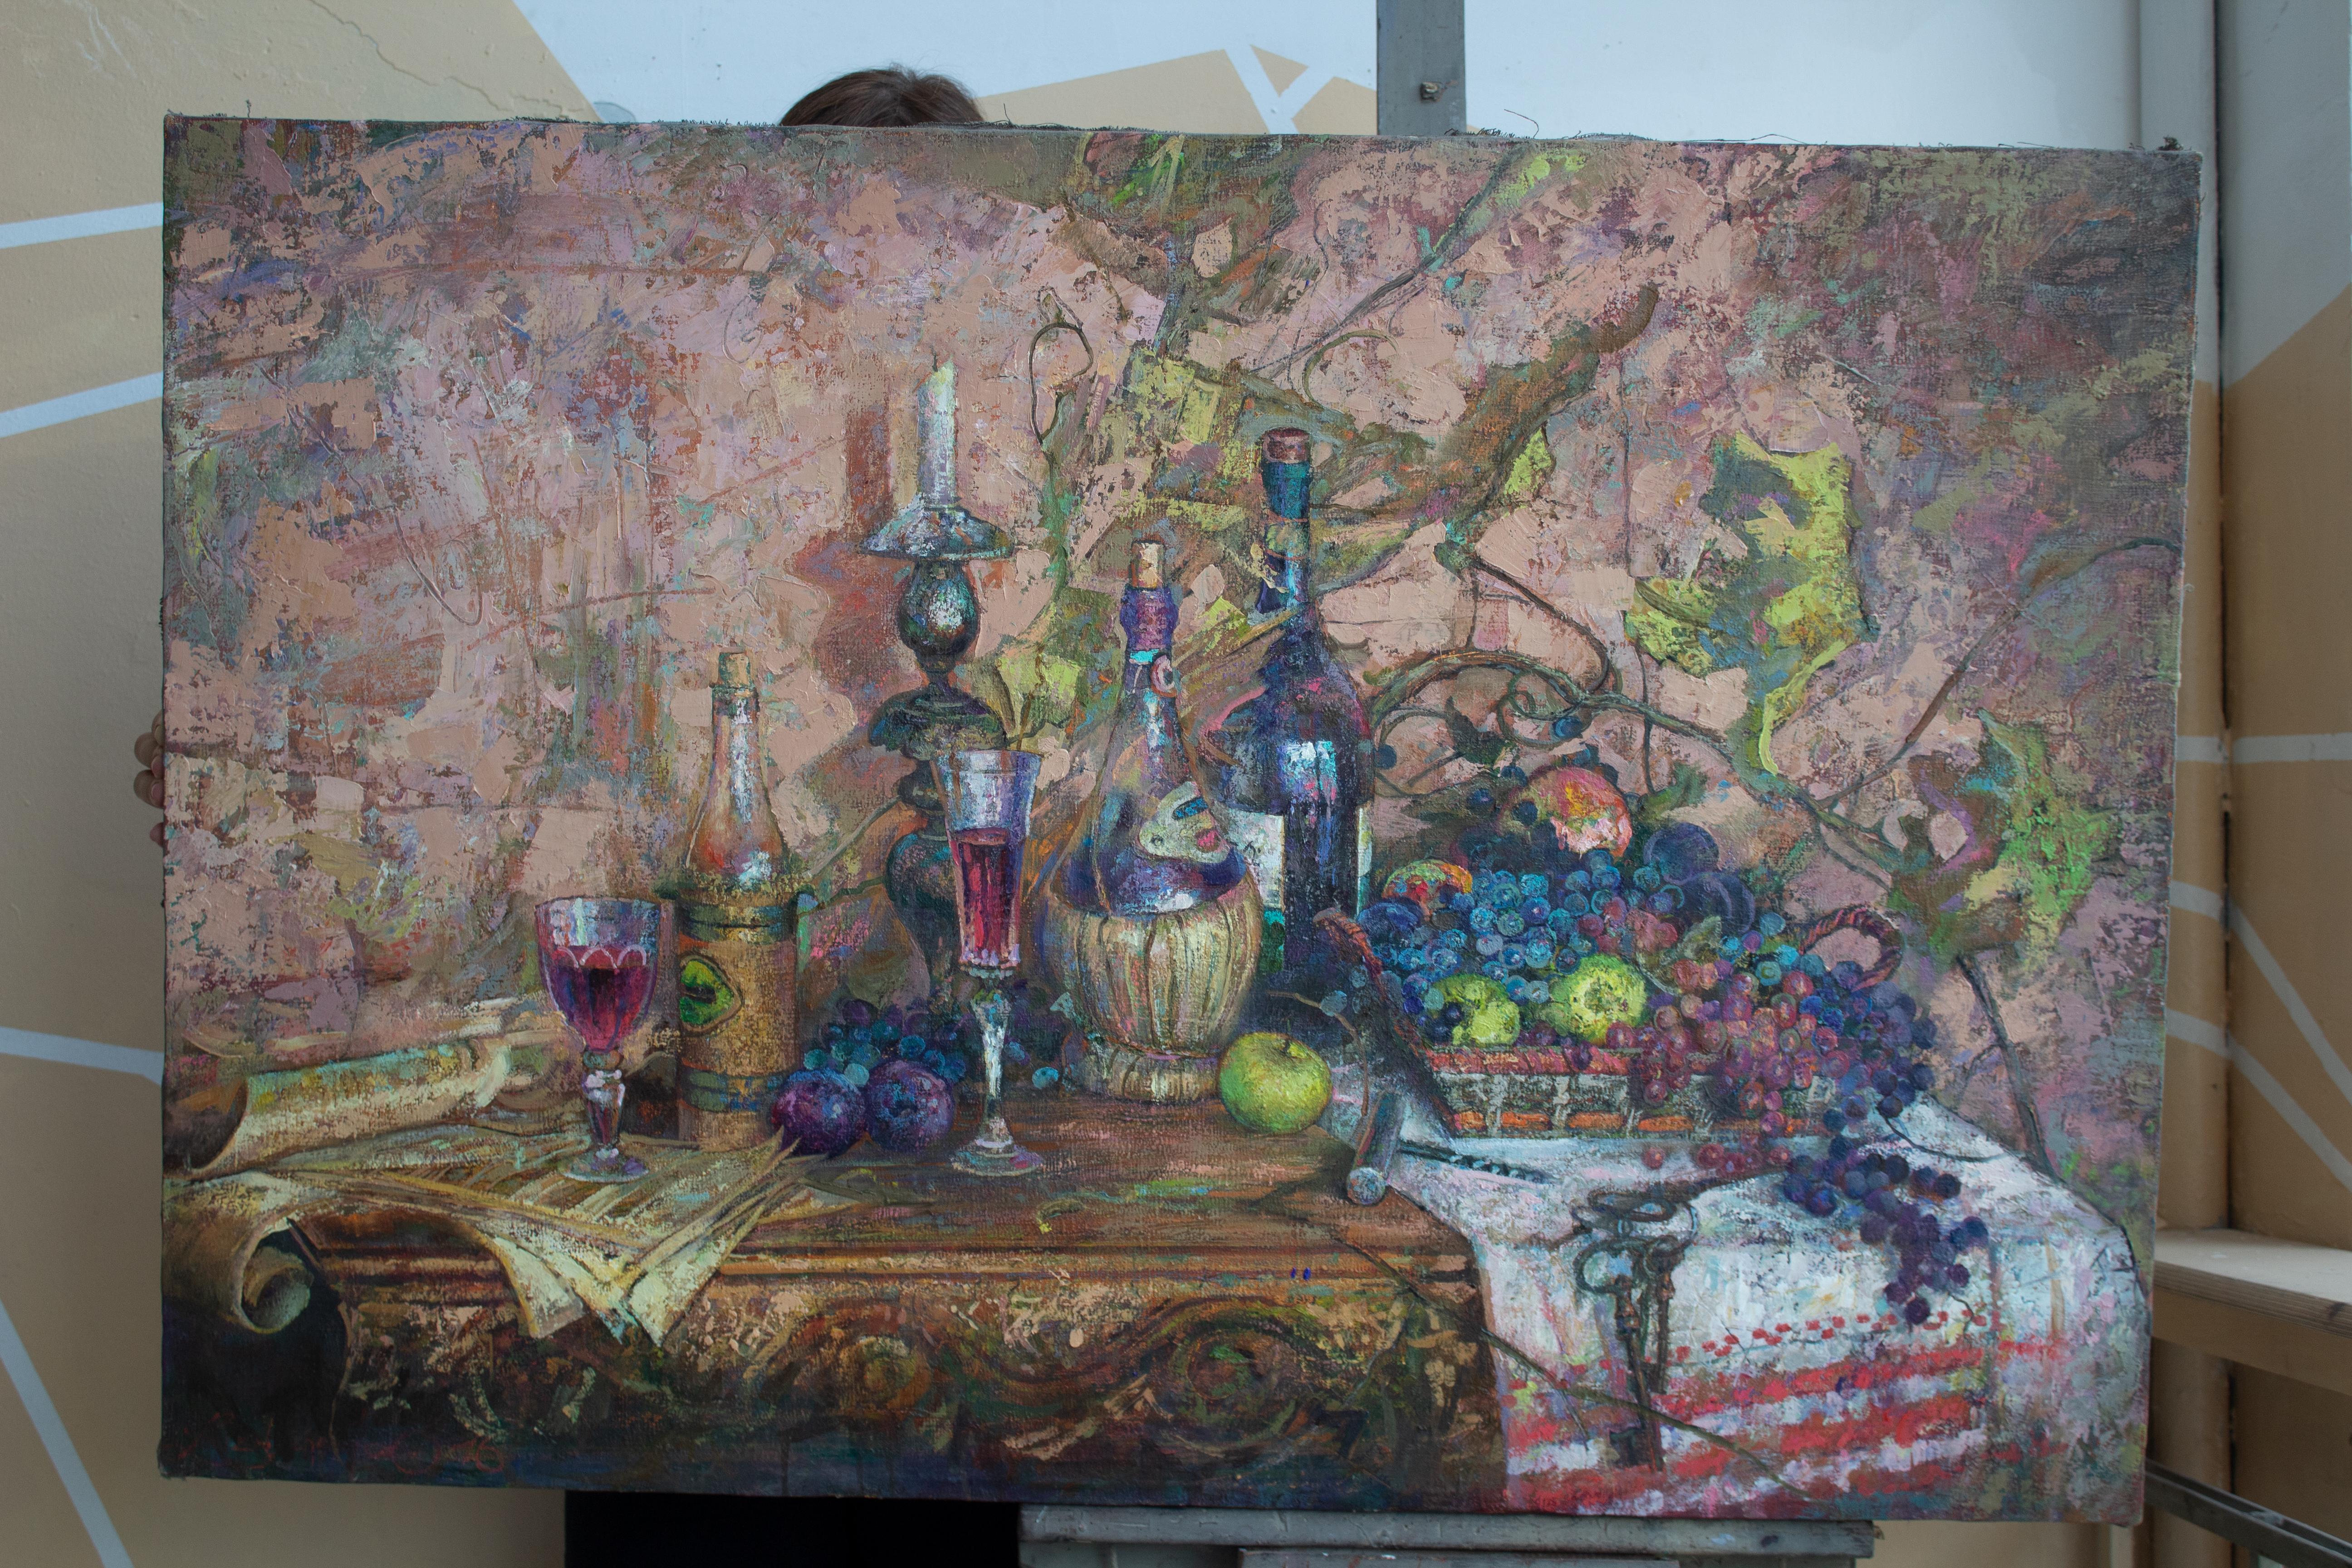 October's Wines - Oil Painting Oil Colors Green White Brown Grey Purple Blue - Gray Still-Life Painting by Alexandr Reznichenko